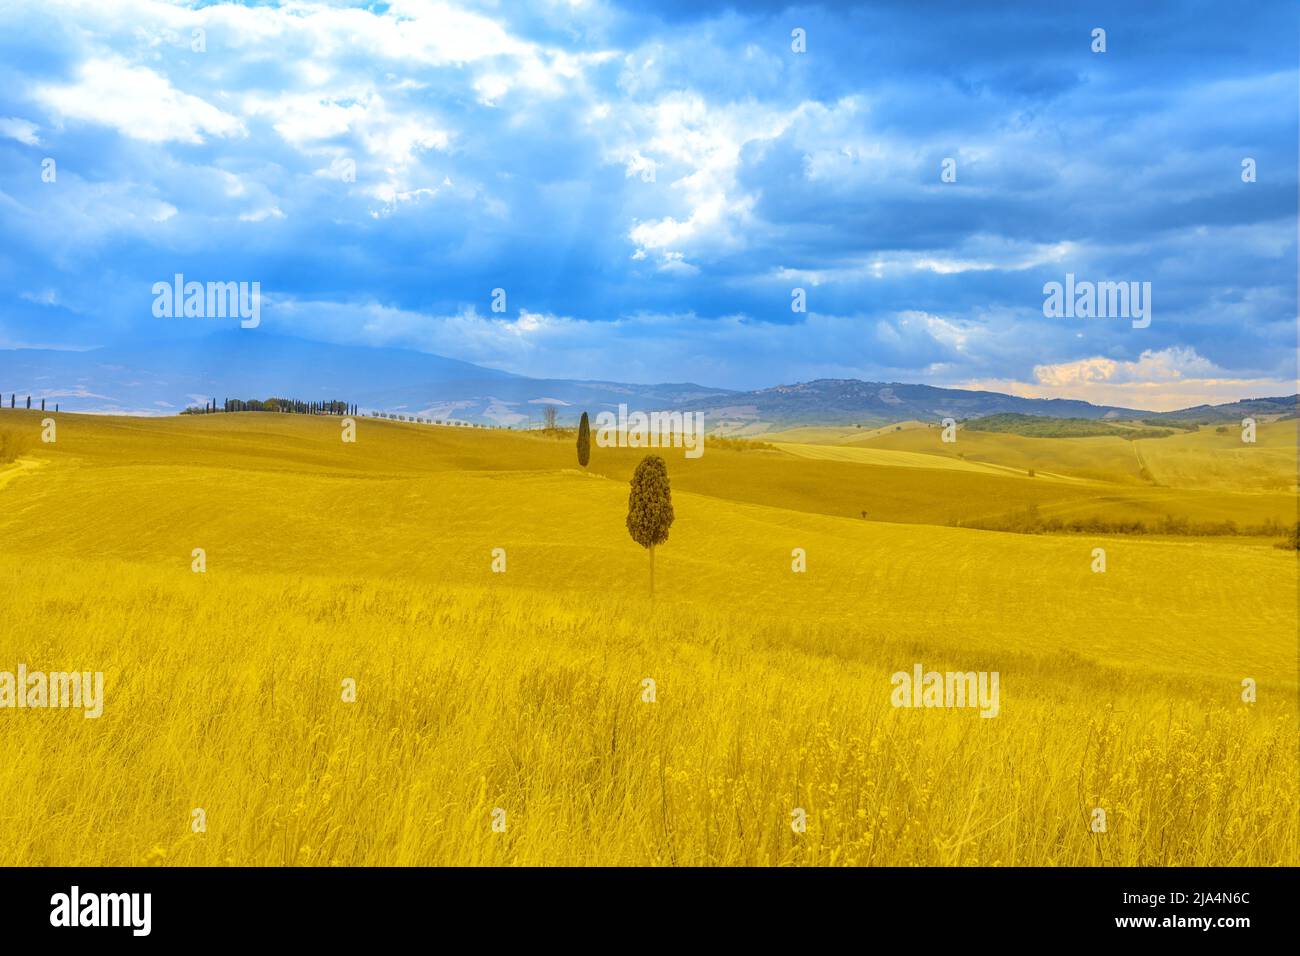 The flag of Ukraine in the colors of blue sky and yellow grain fields. Ukraine's agriculture and patriotic landscape against the war. Yellow field Stock Photo